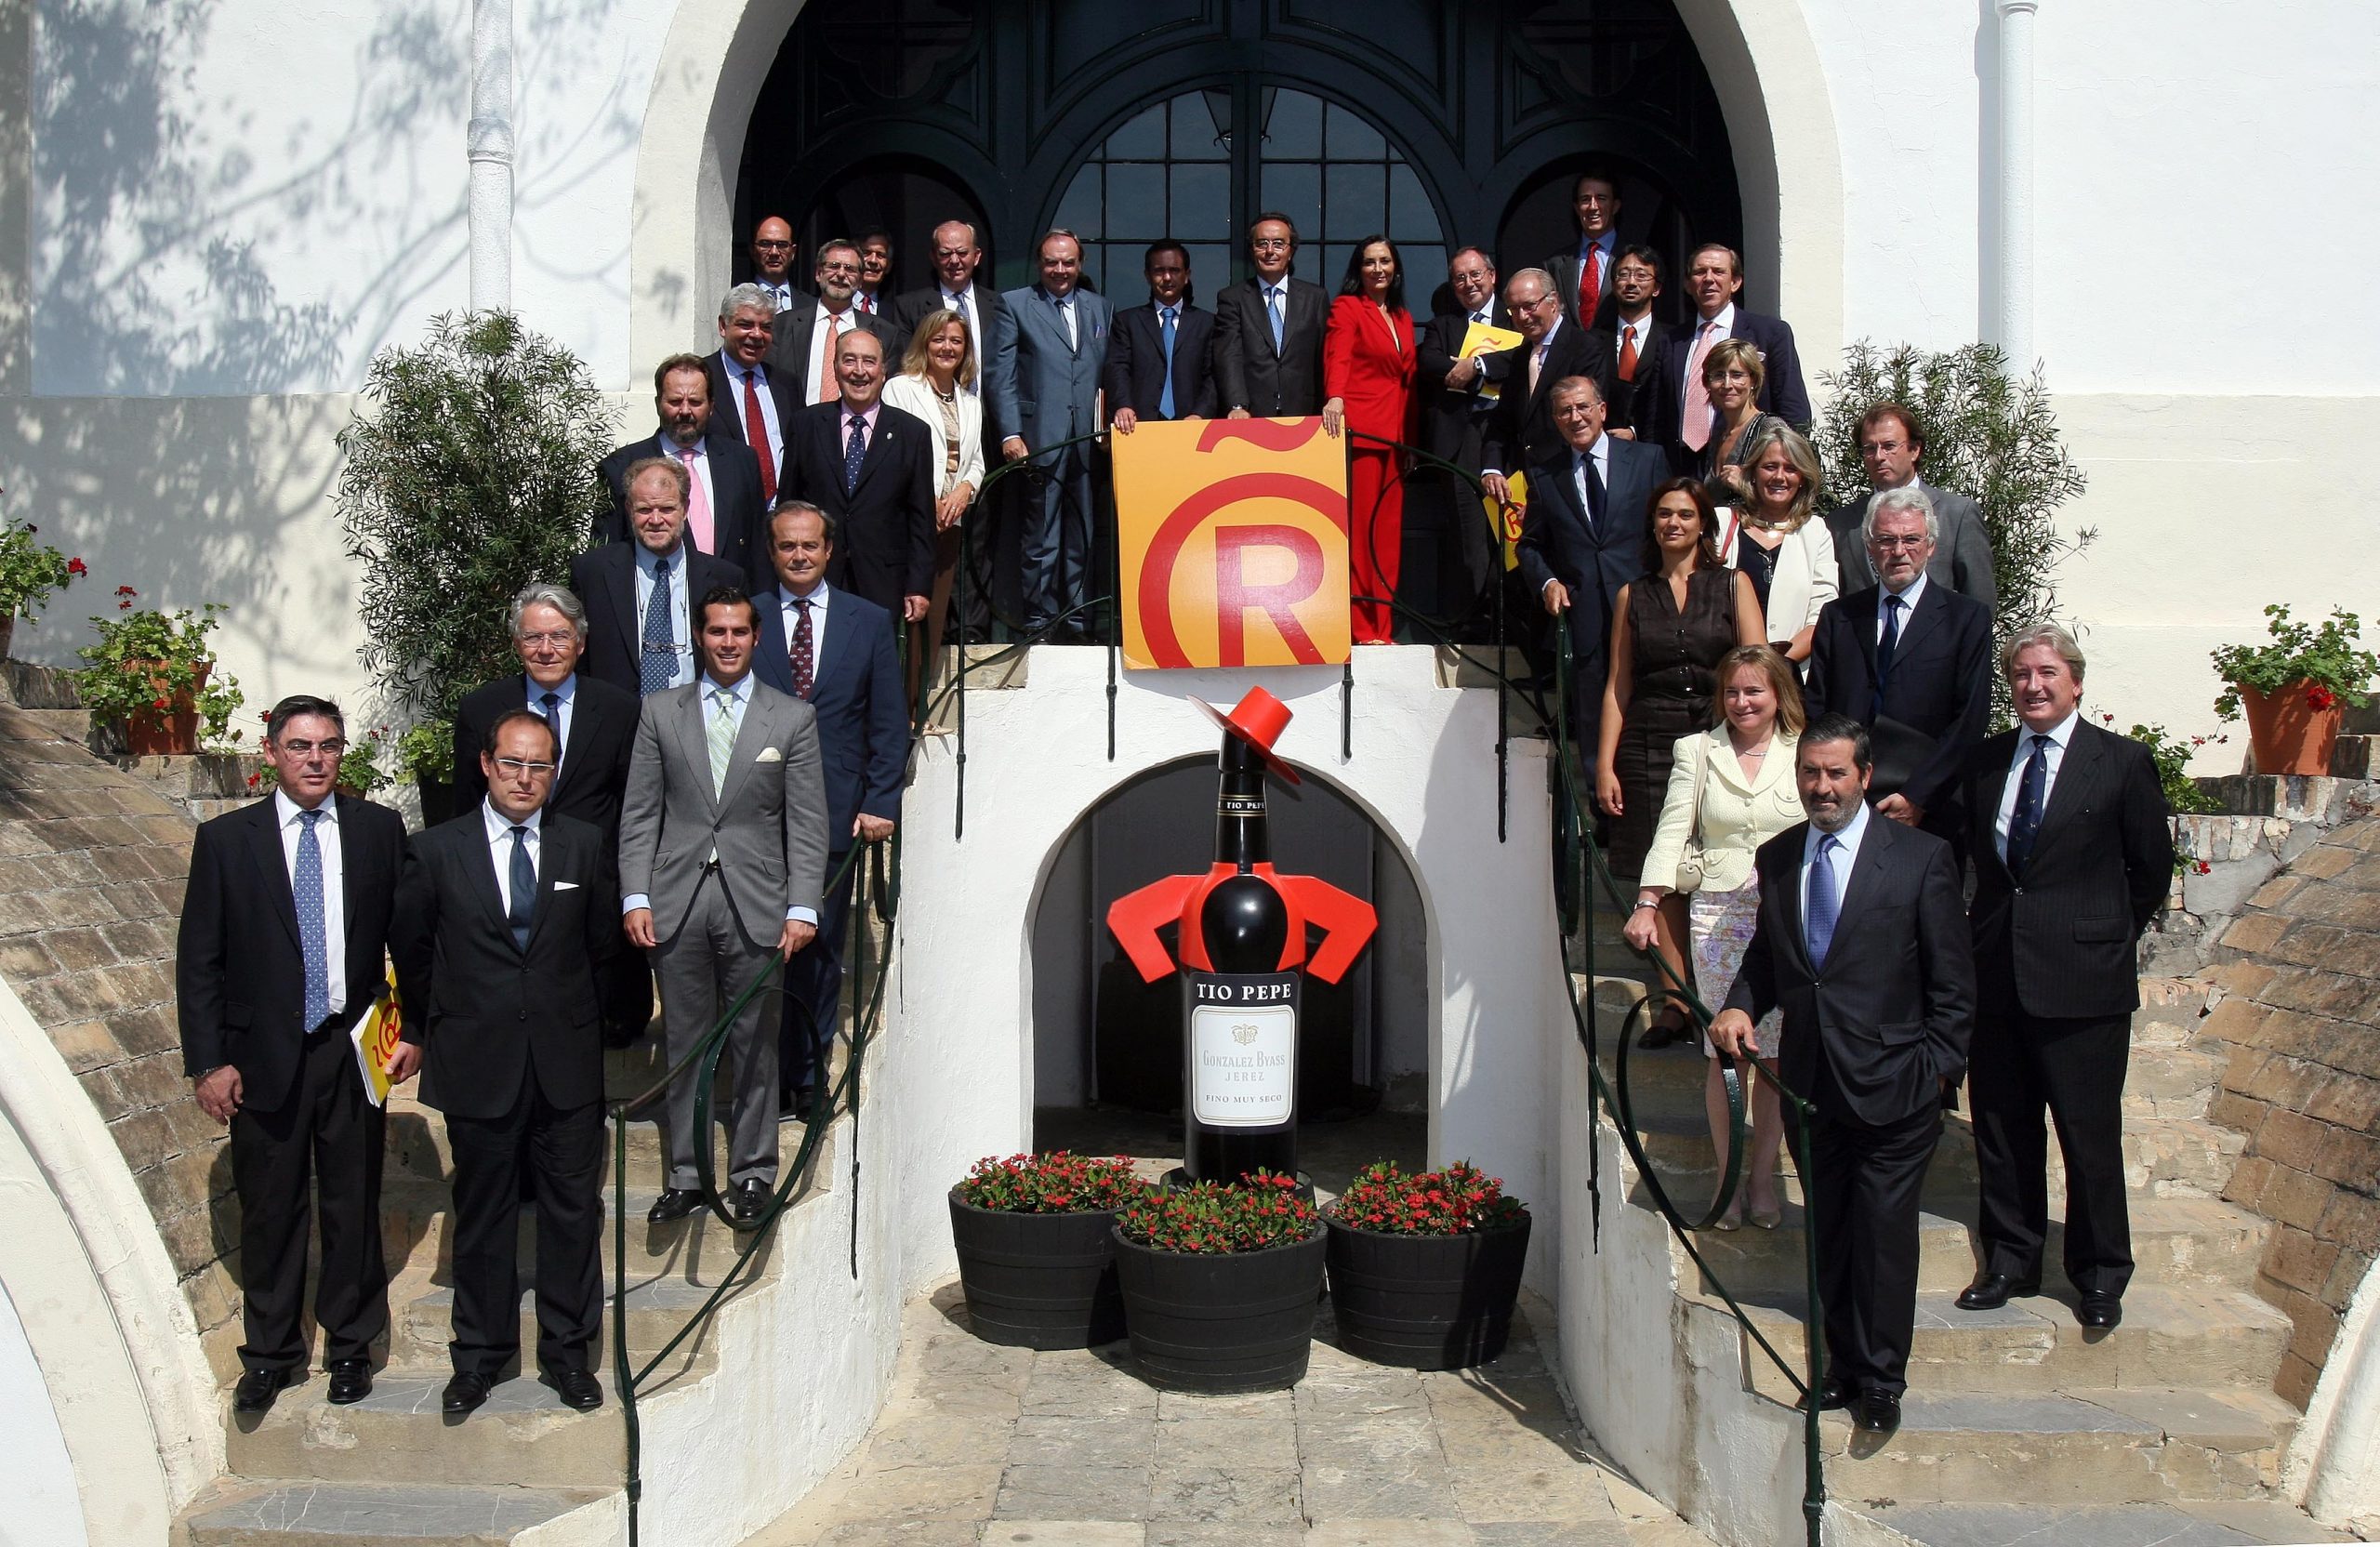 Meeting of the panel of judges for the Third Election of the Honorary Ambassadors of the Spain Brand